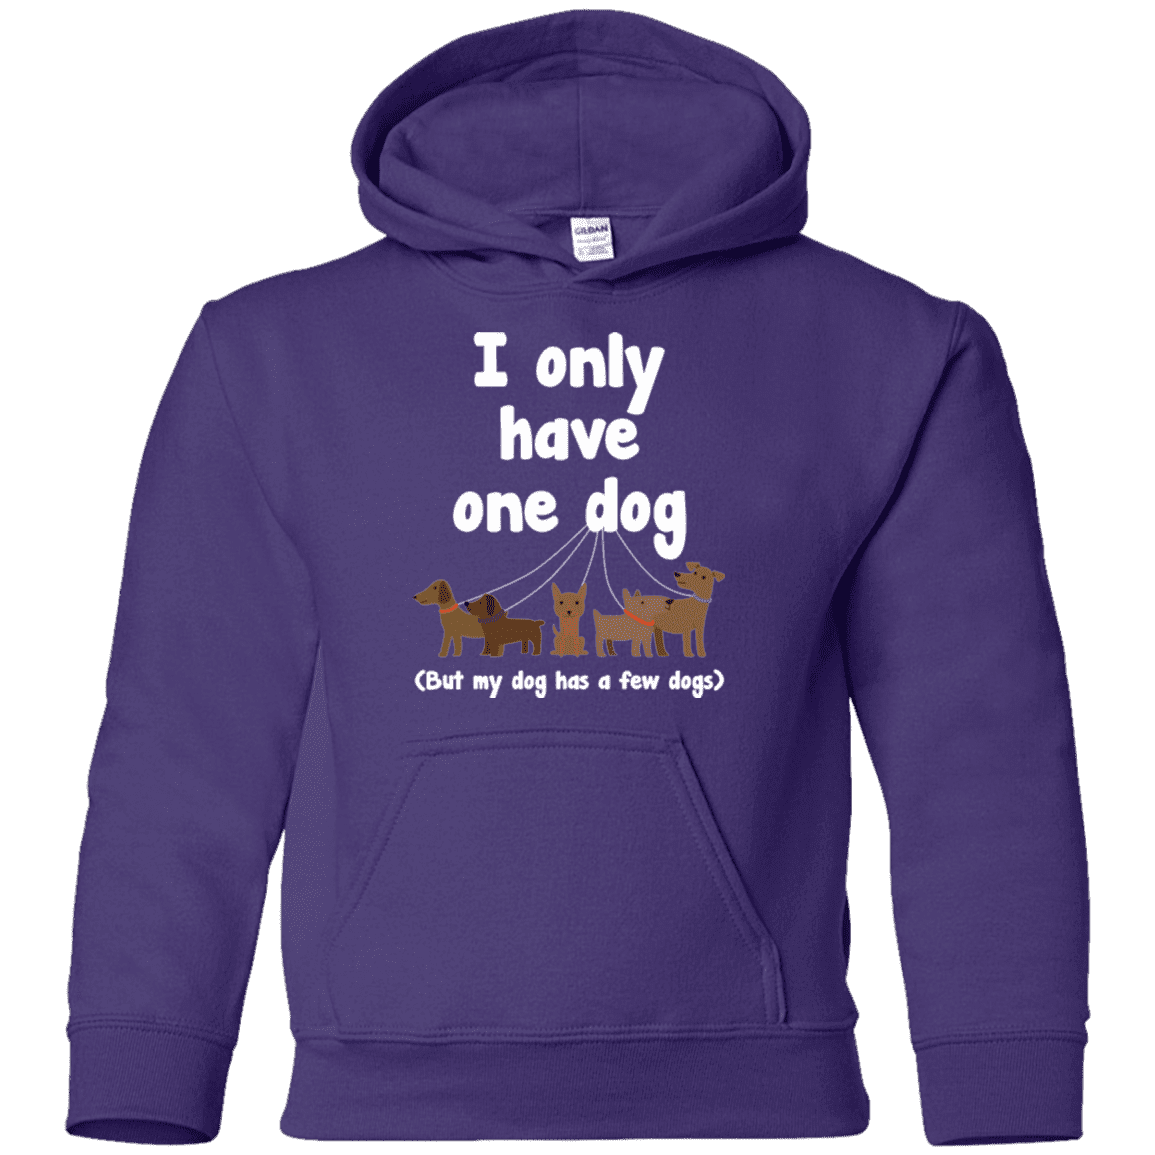 I Only Have 1 Dog - Youth Hoodie.